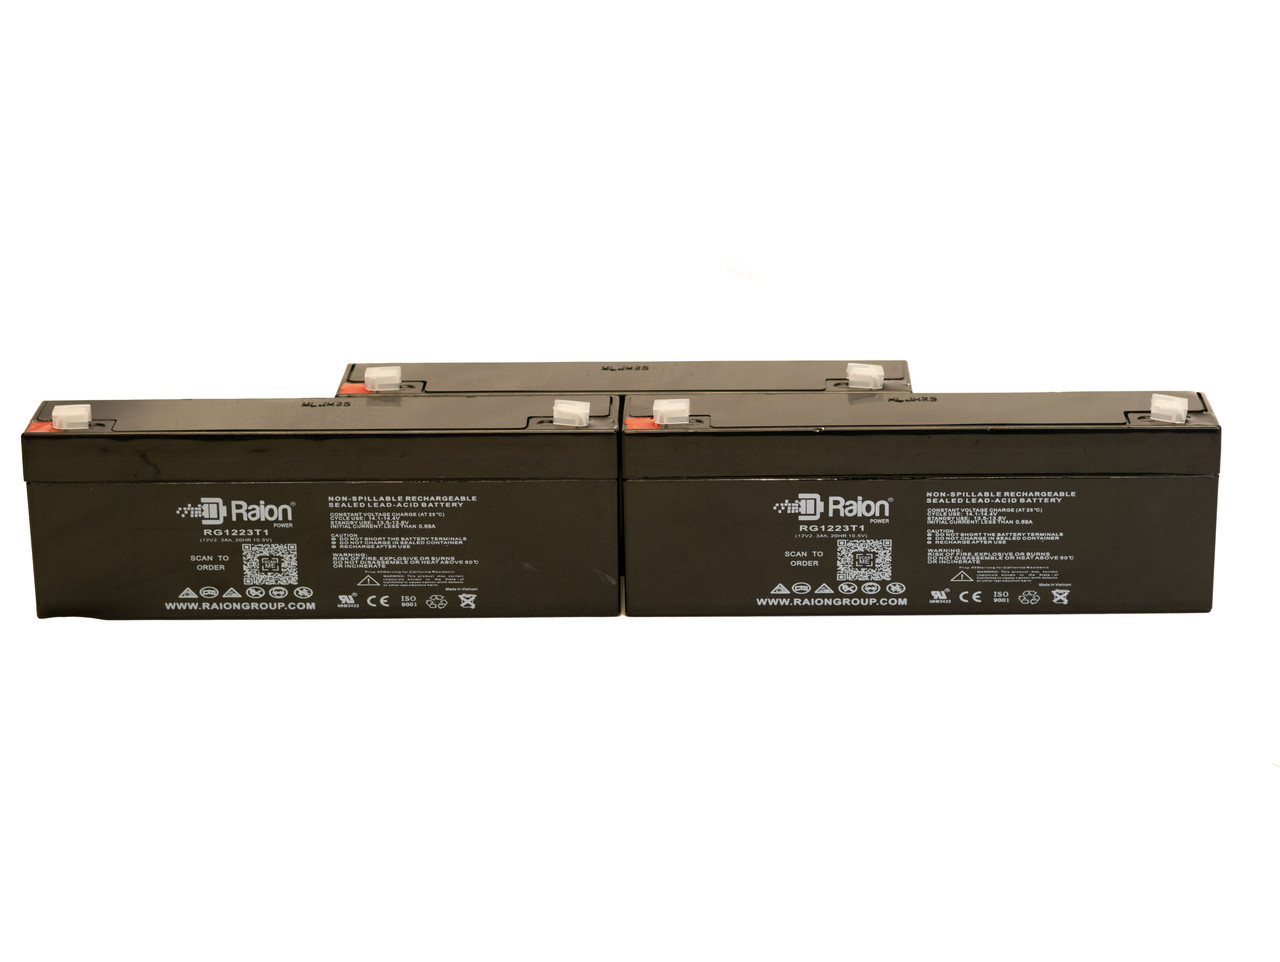 Raion Power 12V 2.3Ah RG1223T1 Replacement Medical Battery for Kontron 470 - 3 Pack